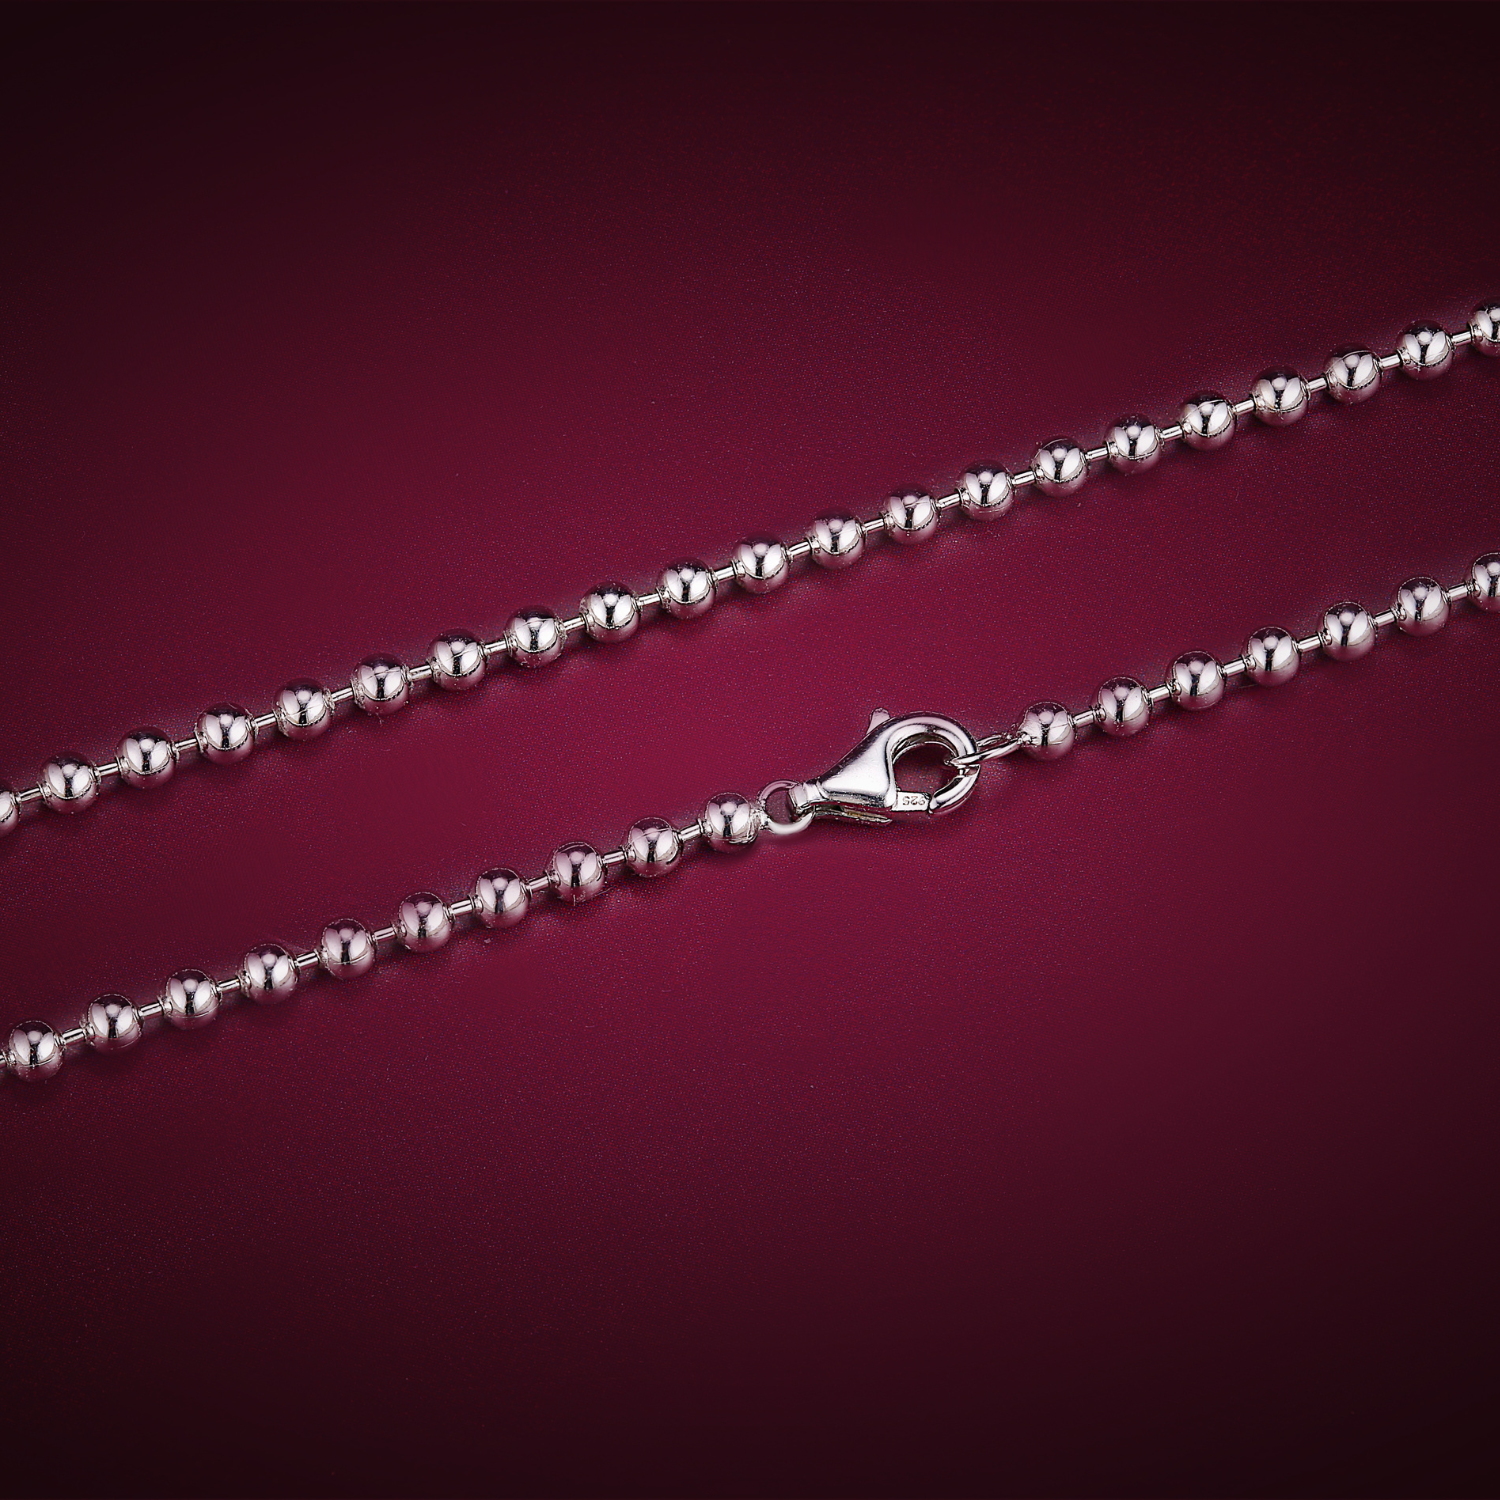 Beads Chain, 925 Silver